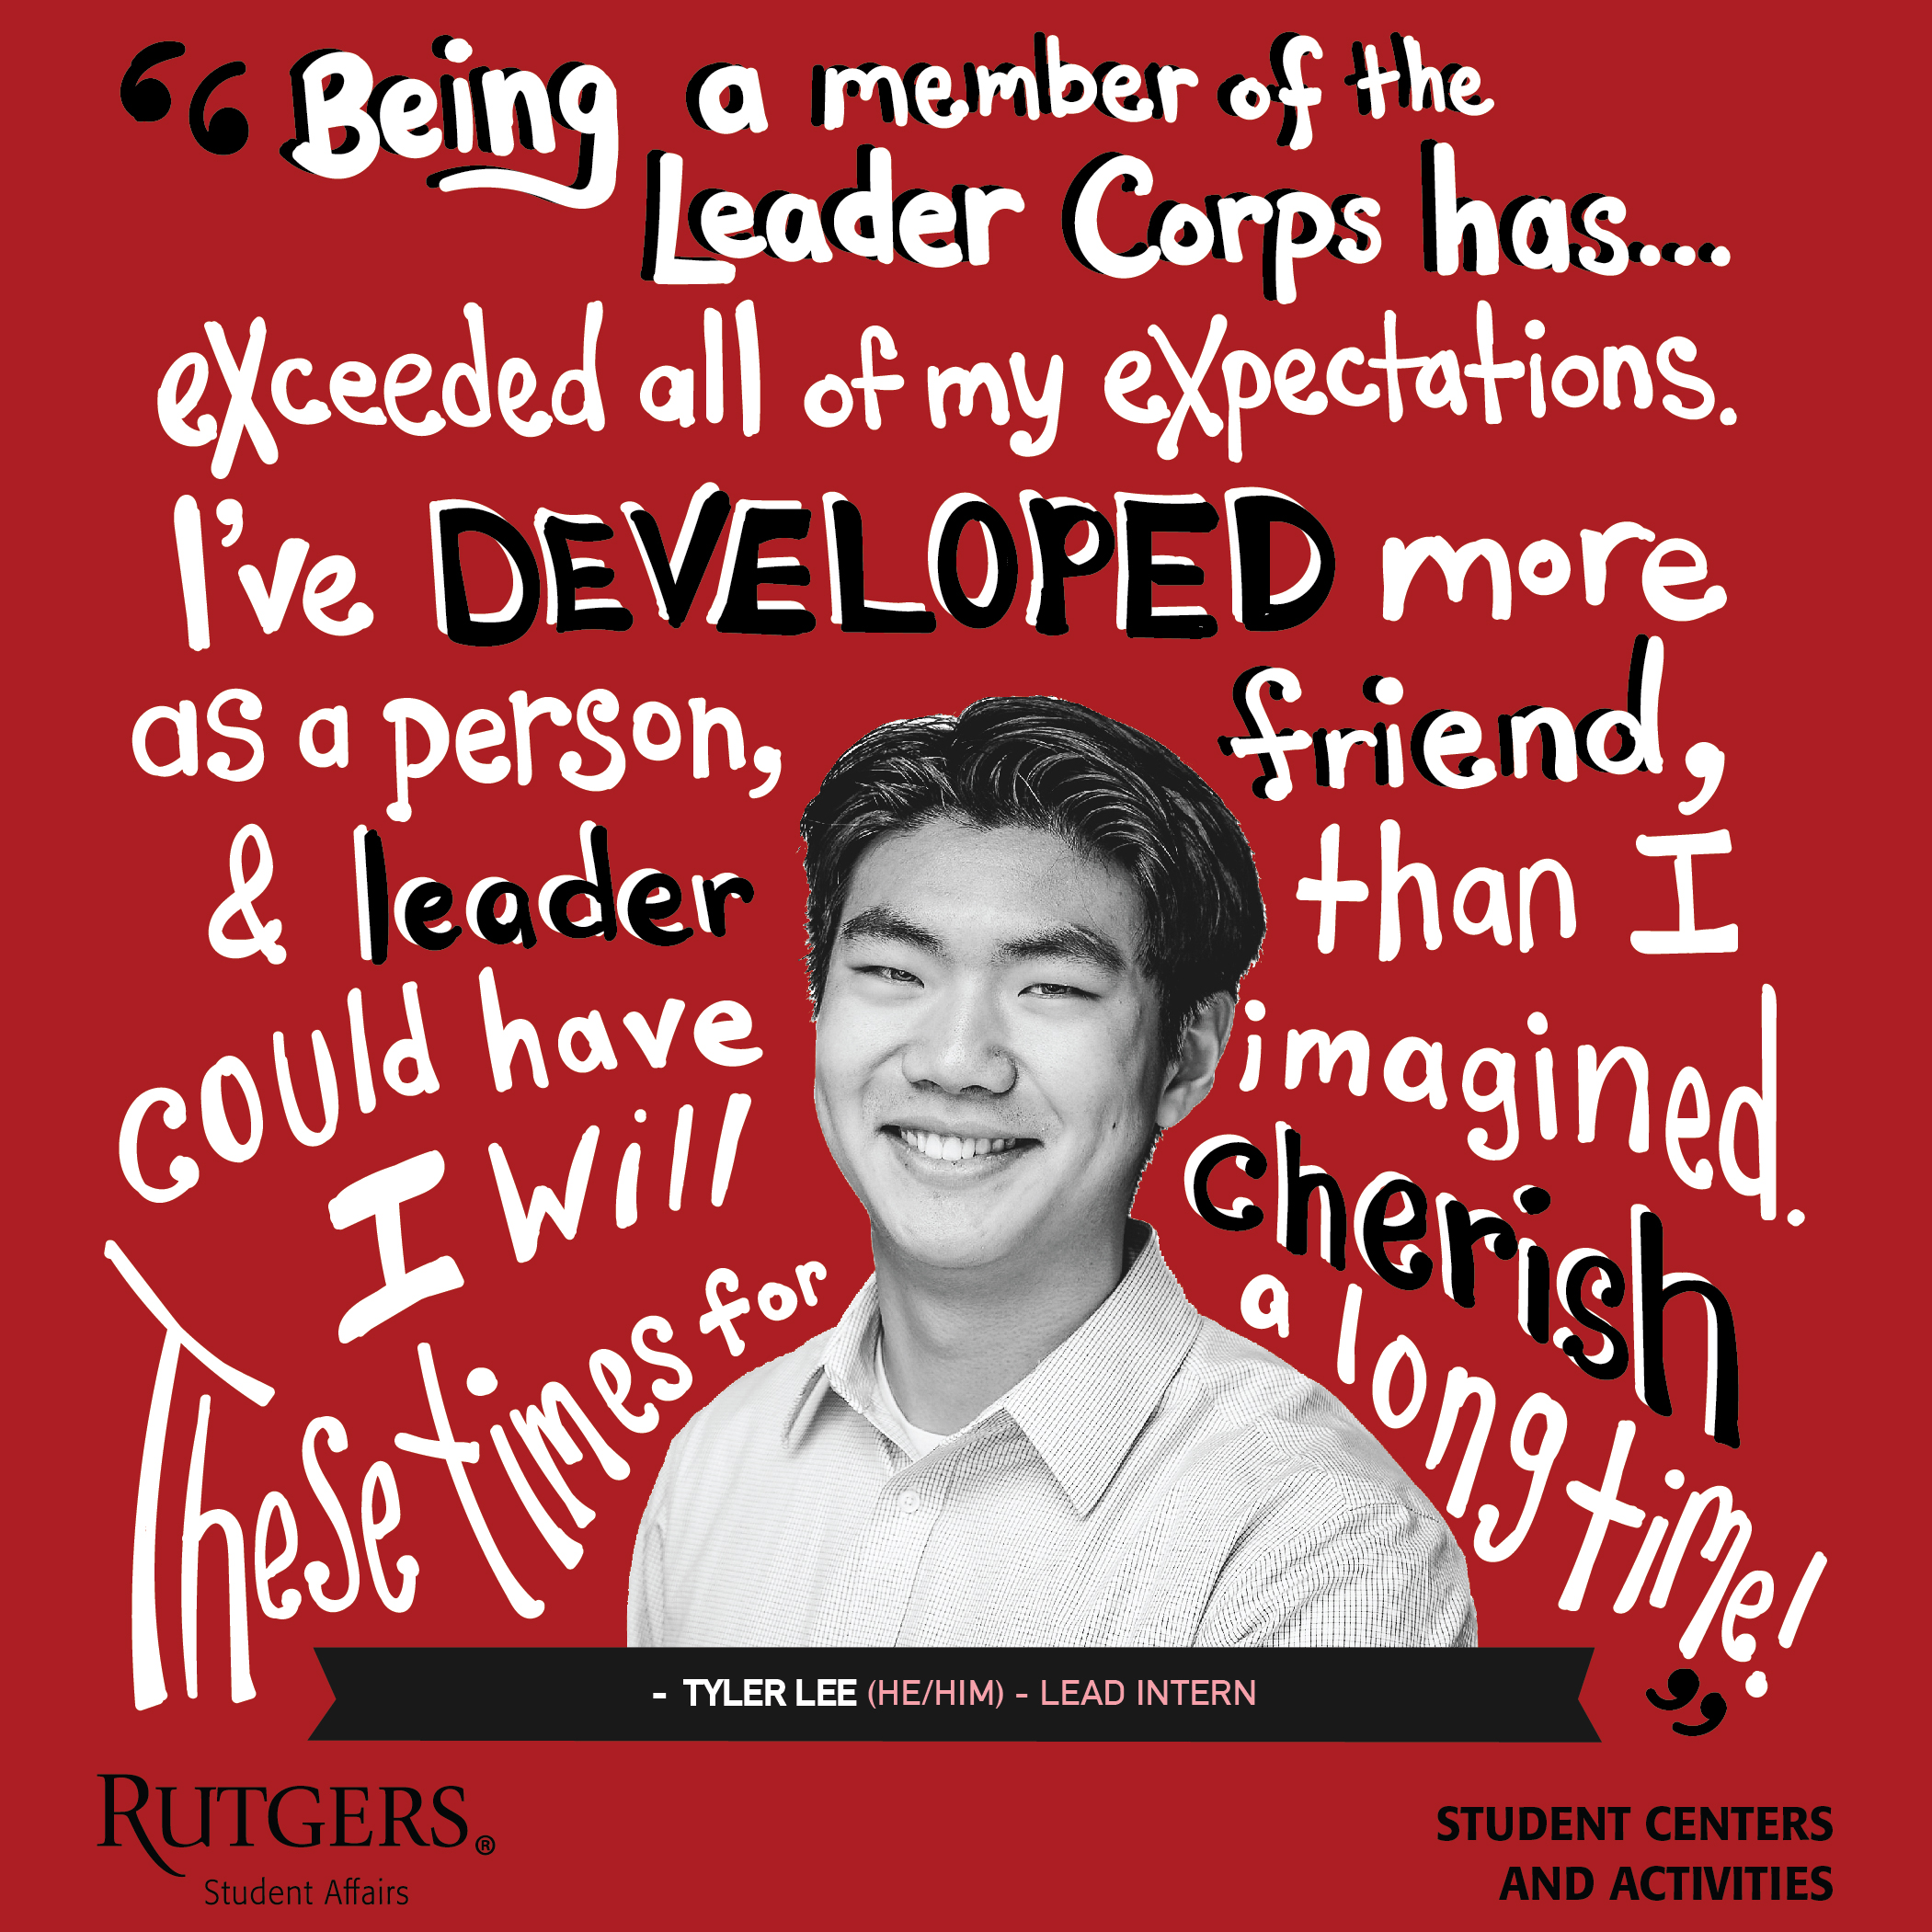 A quote by Tyler Lee: "Being a member of the Leader Corps has exceeded all of my expectations. I've developed more as a person, friend, and leader than I could have imagines. I will cherish these times for a long time!"